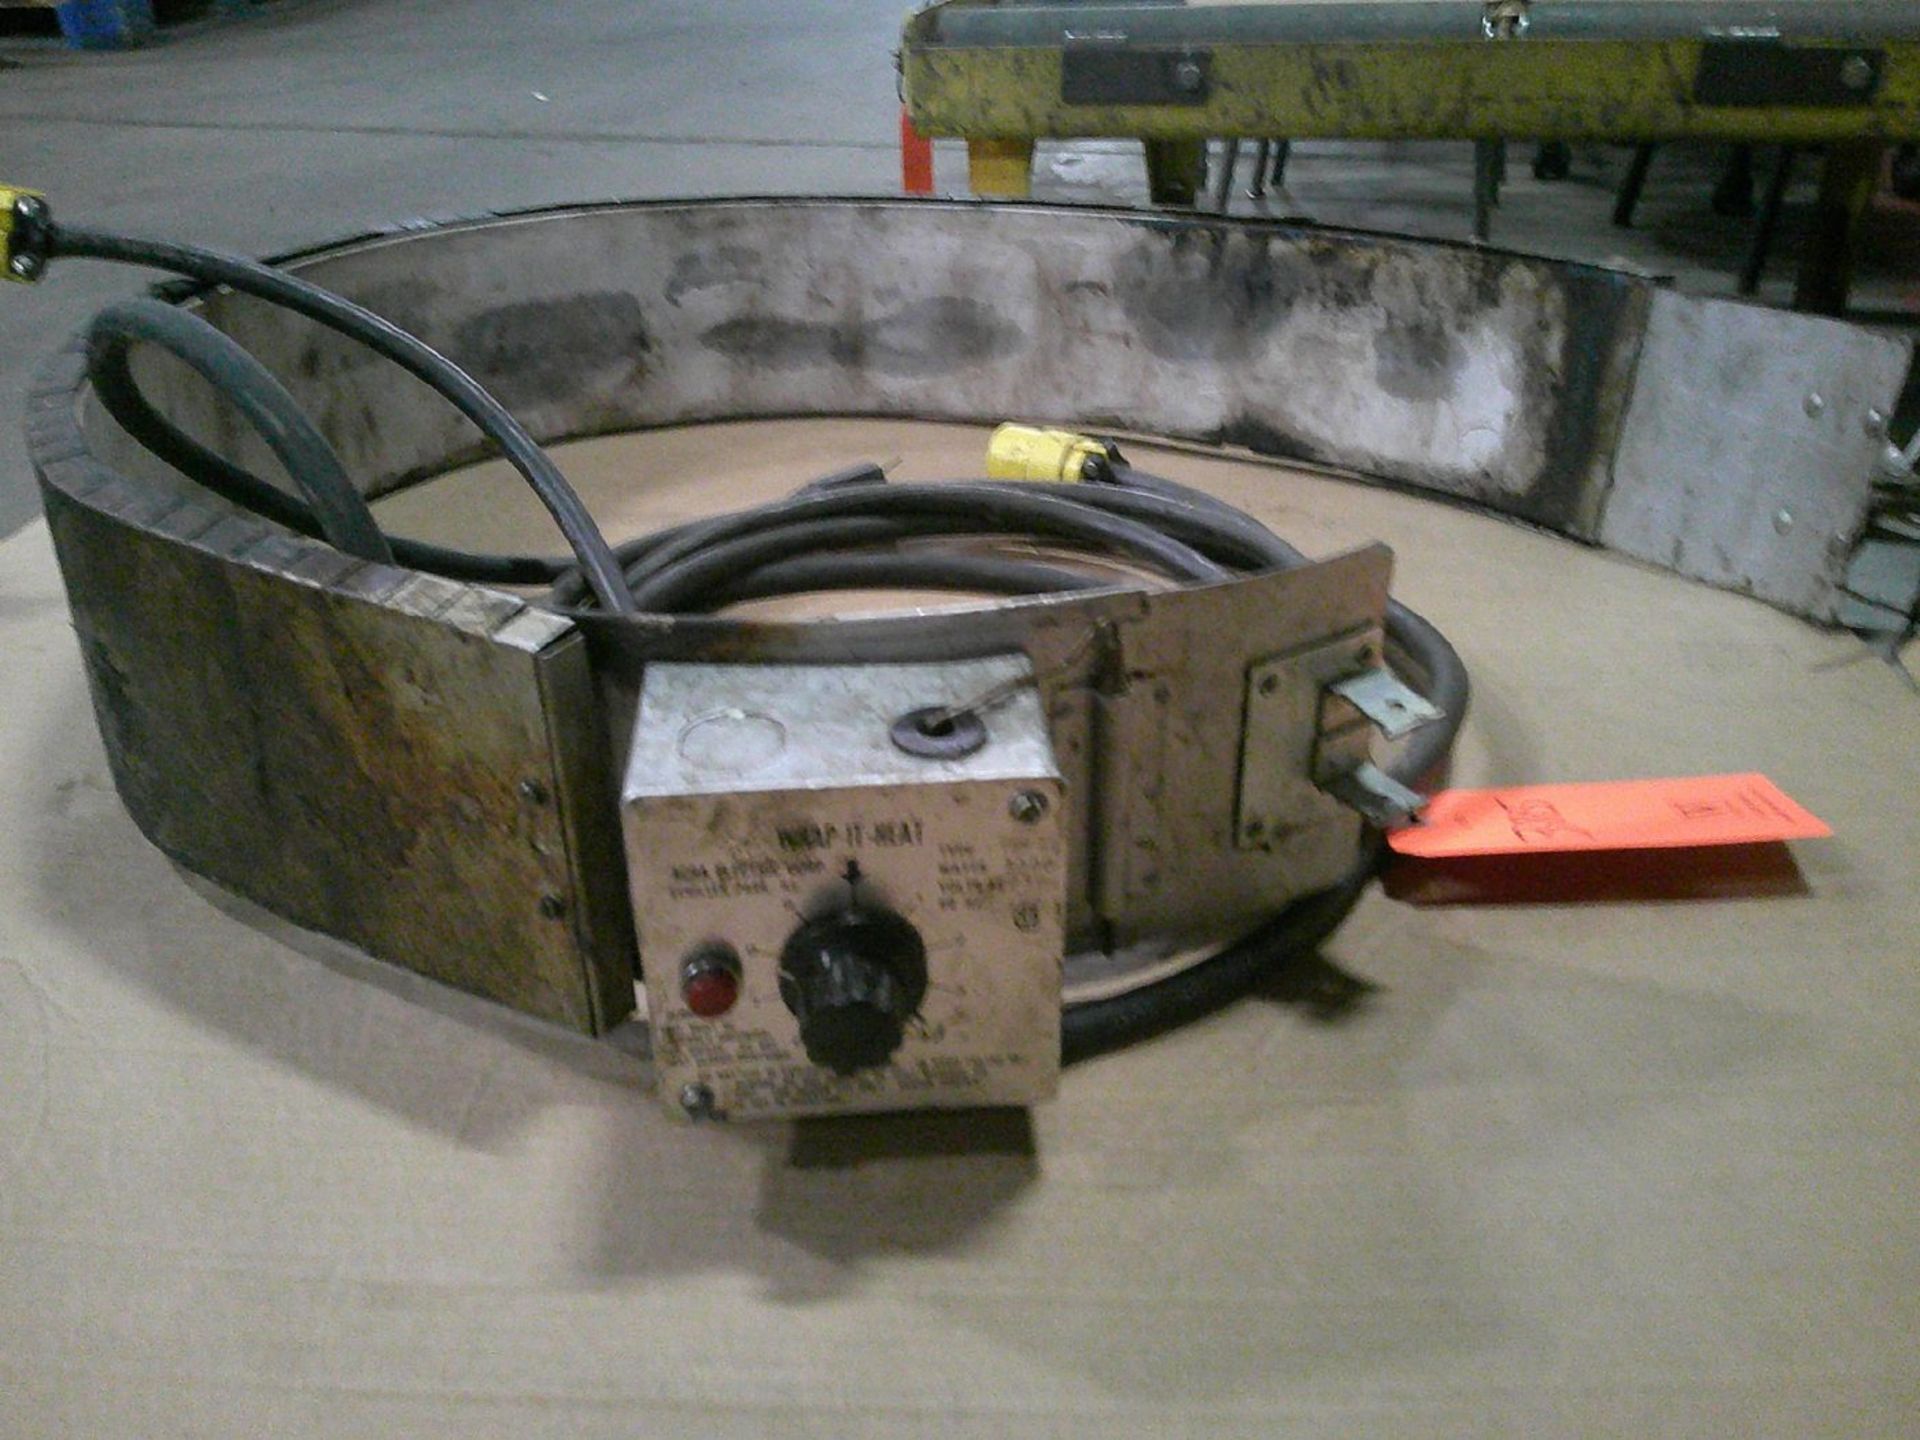 Wrap-It-Heat Barrel and Drum Heater; with Extension Cord - Image 2 of 2